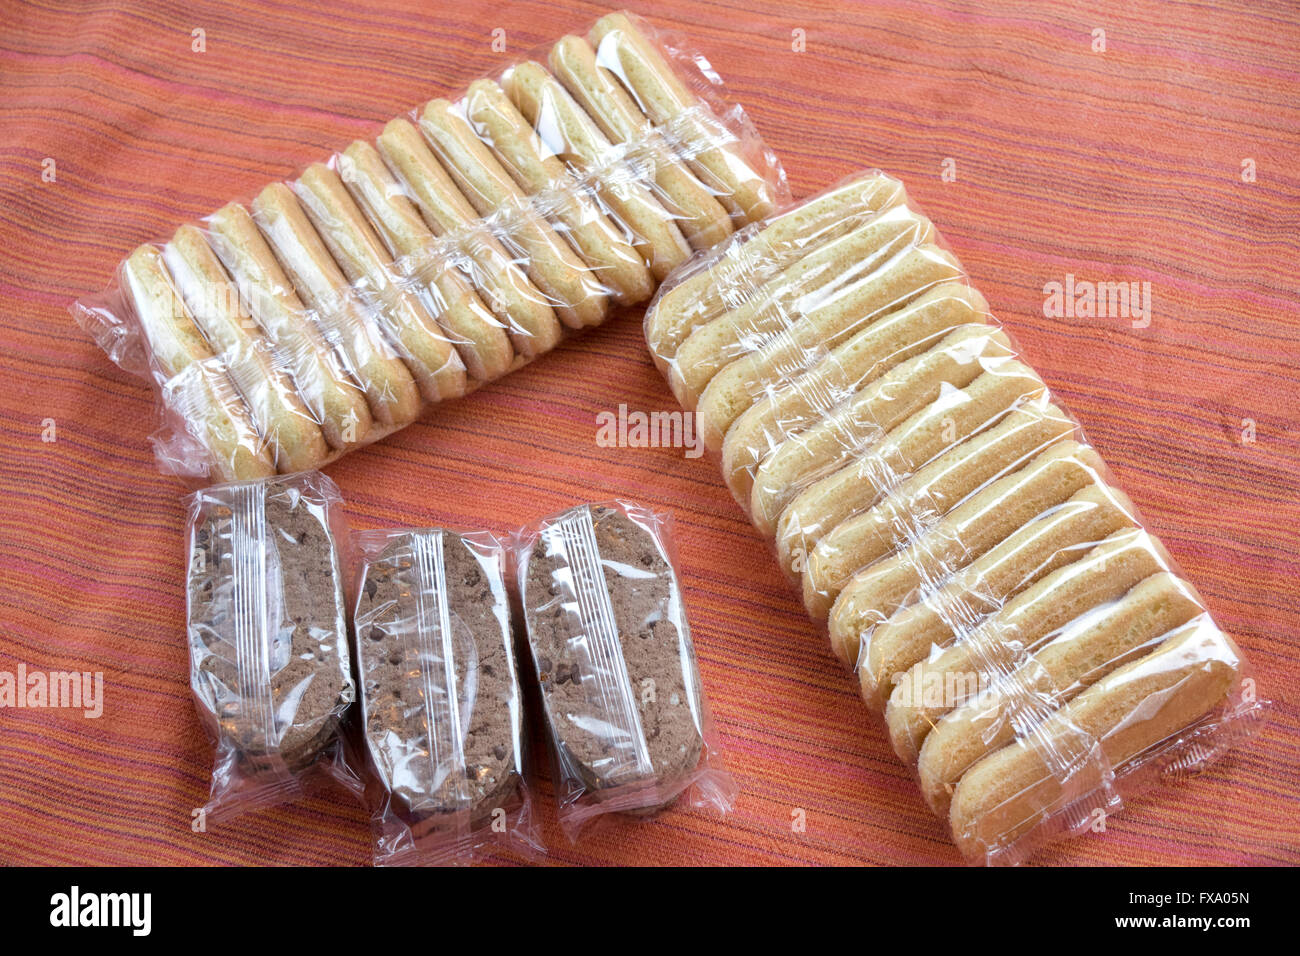 retail packs of snacks and bars in individual packages Stock Photo